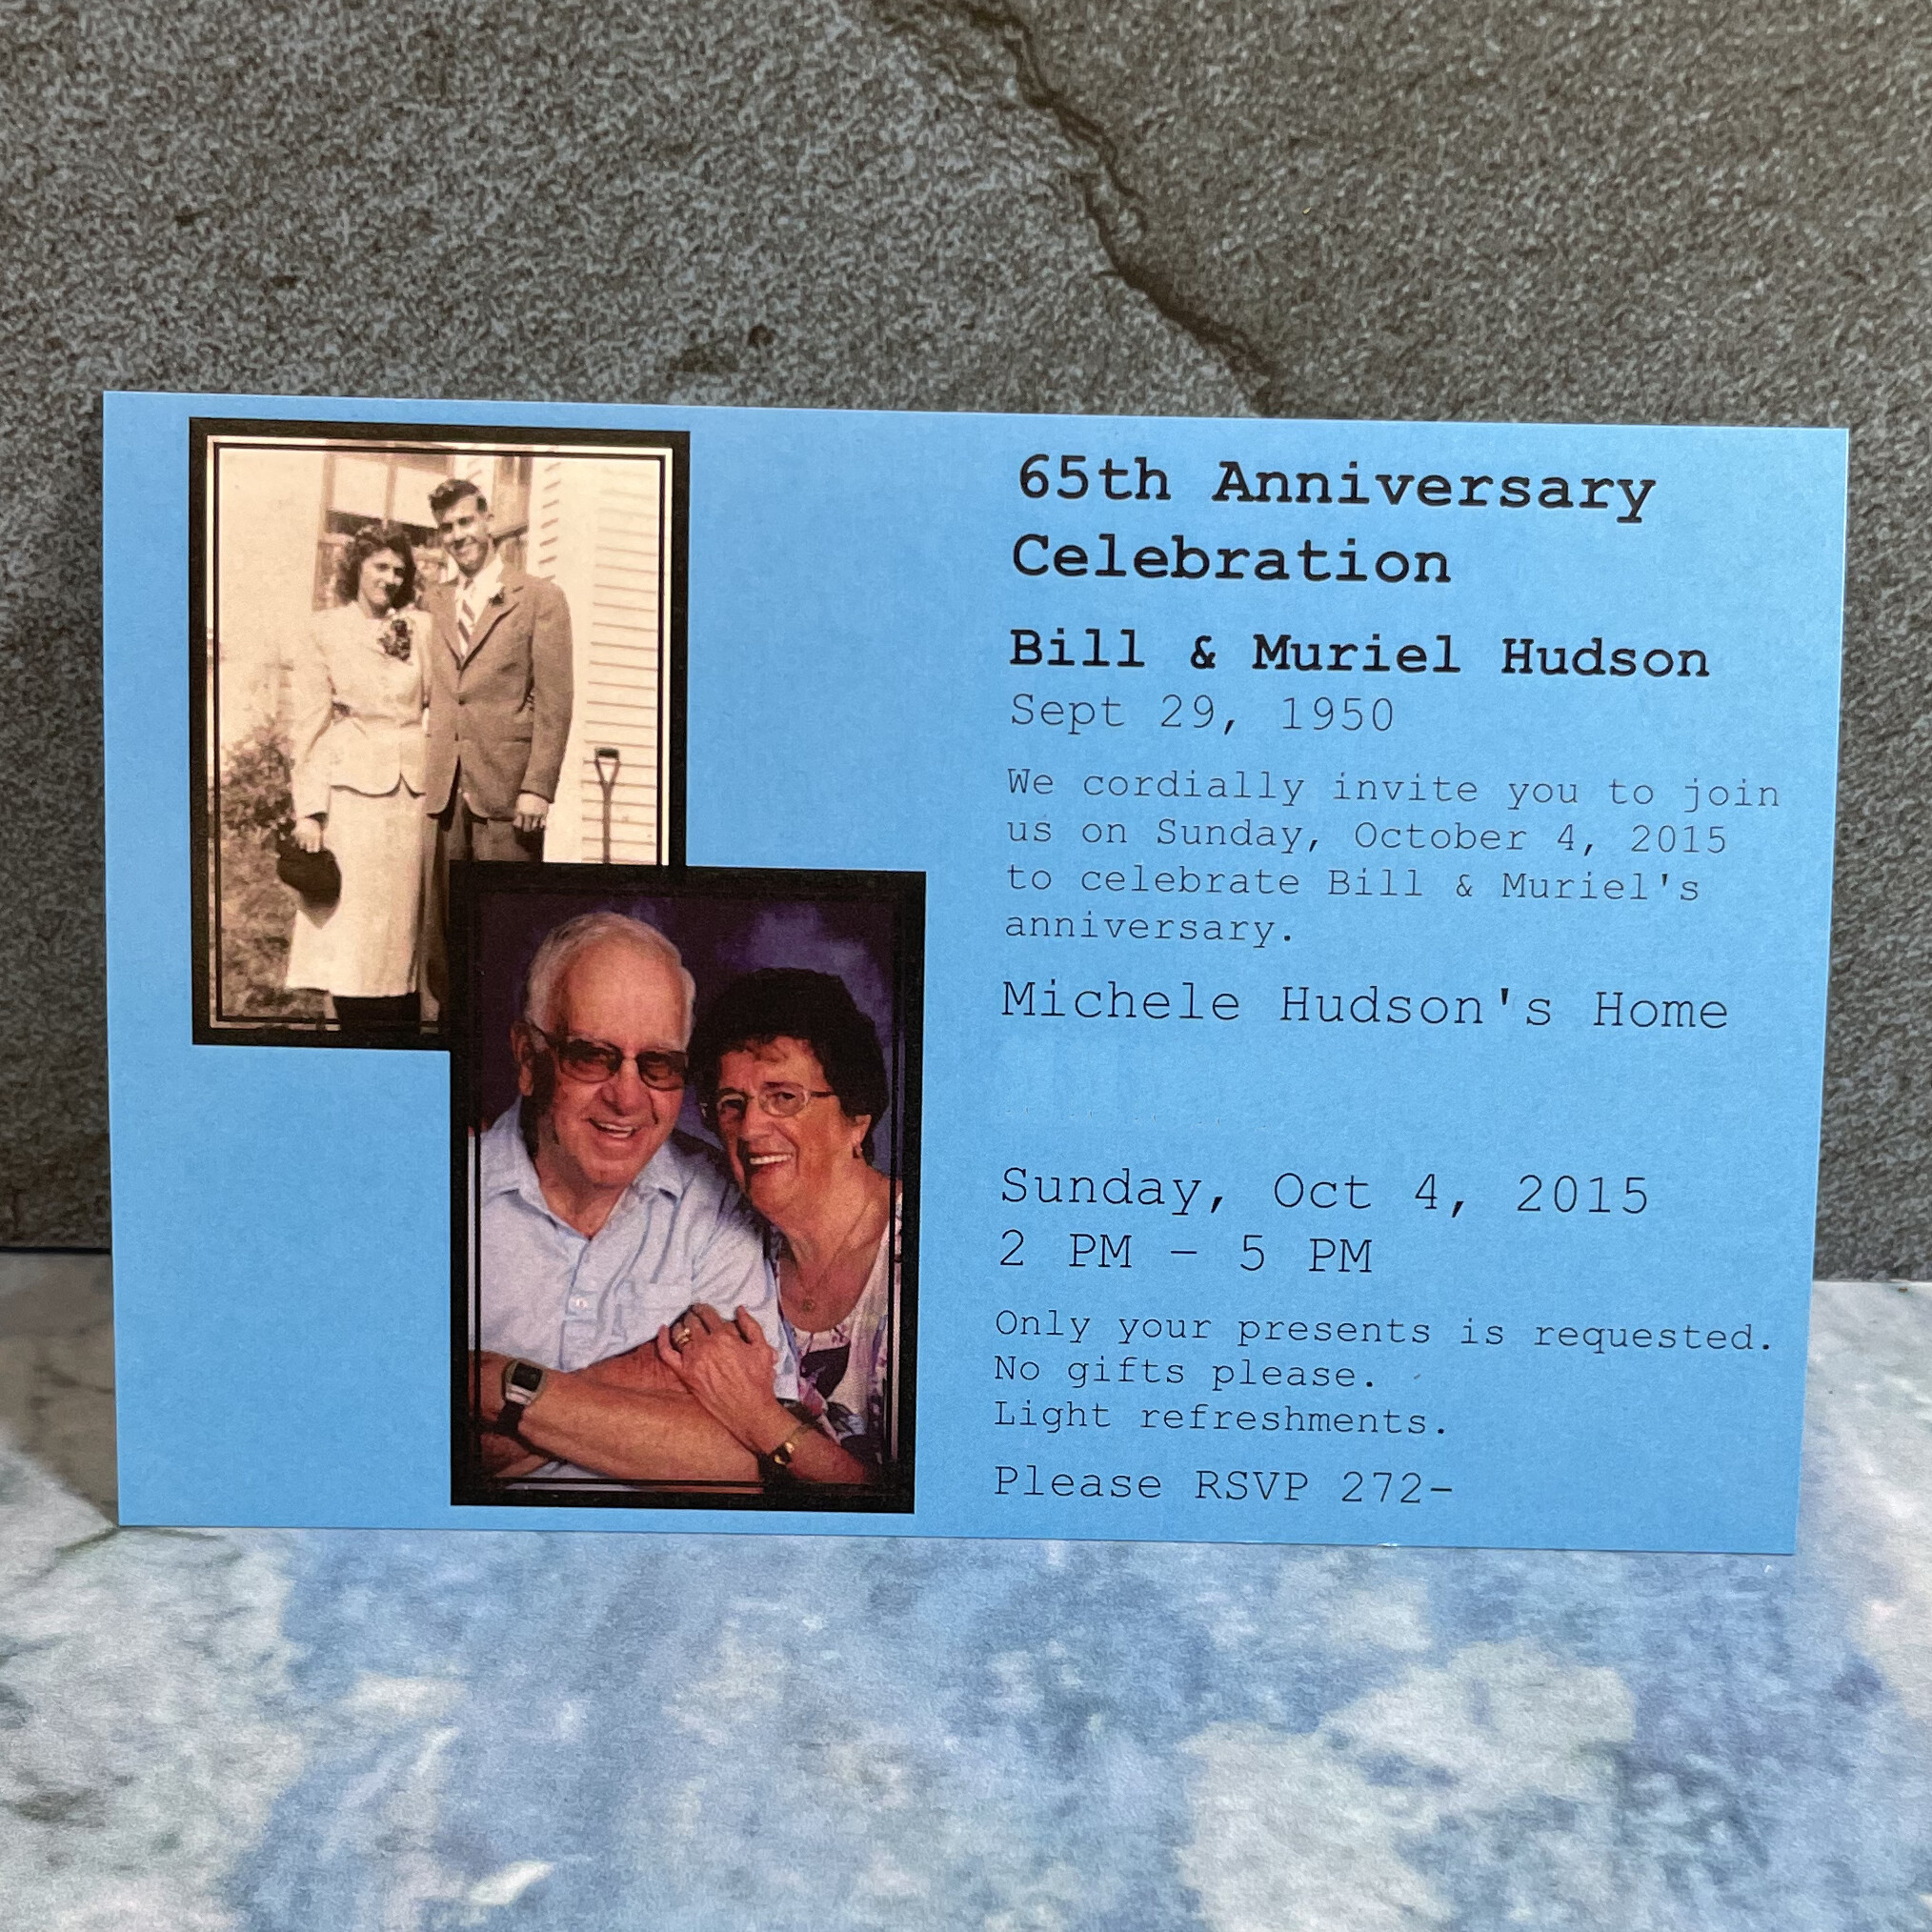 65th Anniversary Celebration for Bill & Muriel - with then and now photos